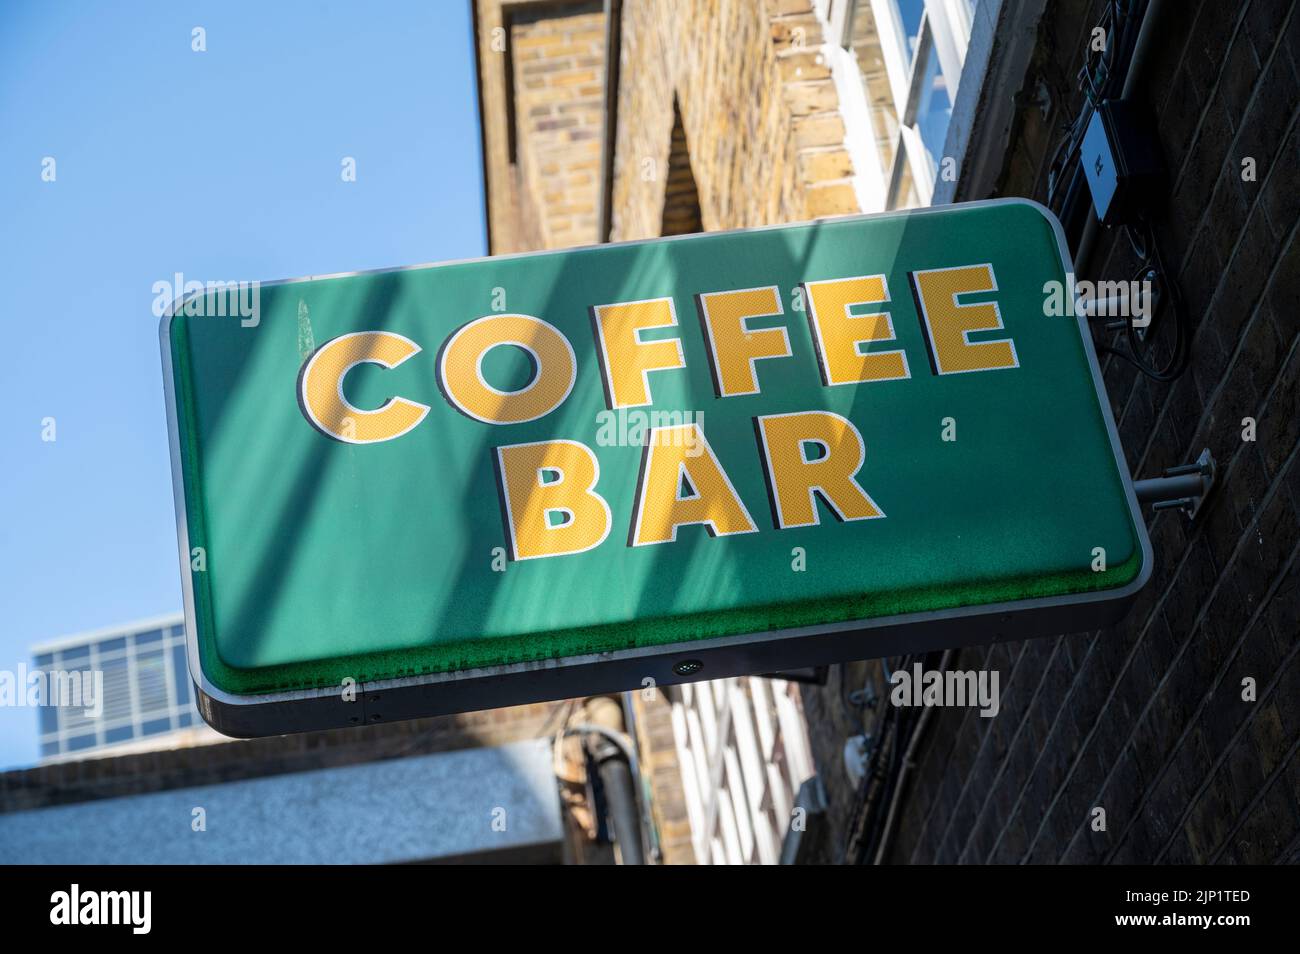 A sign for a coffee bar in London UK Stock Photo